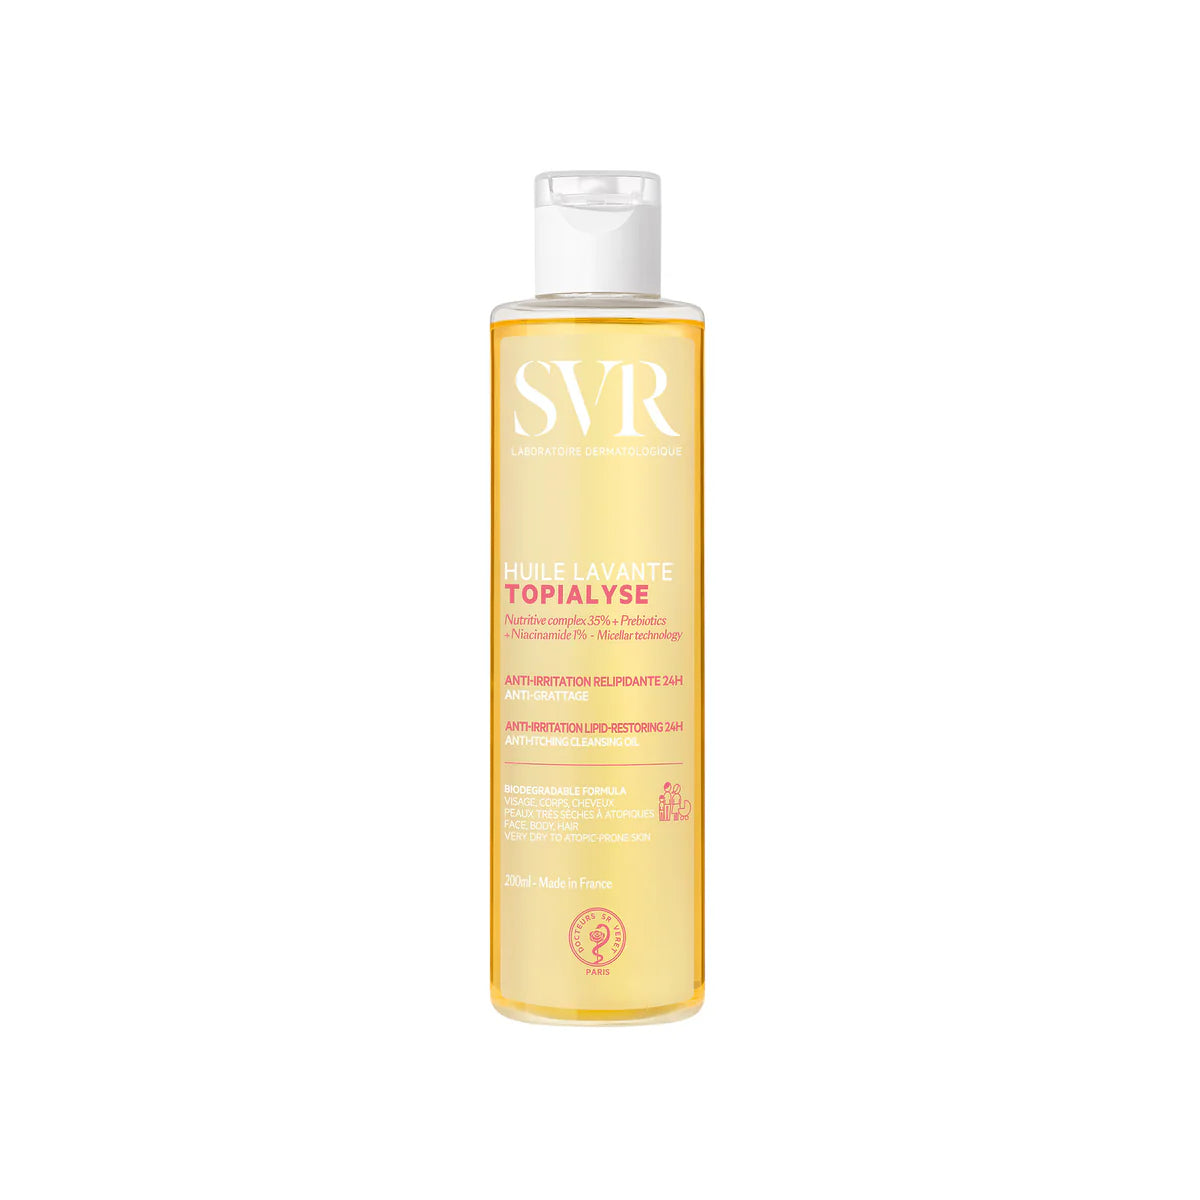 SVR Topialyse Gentle Cleansing Oil 200ml - FrenchSkinLab